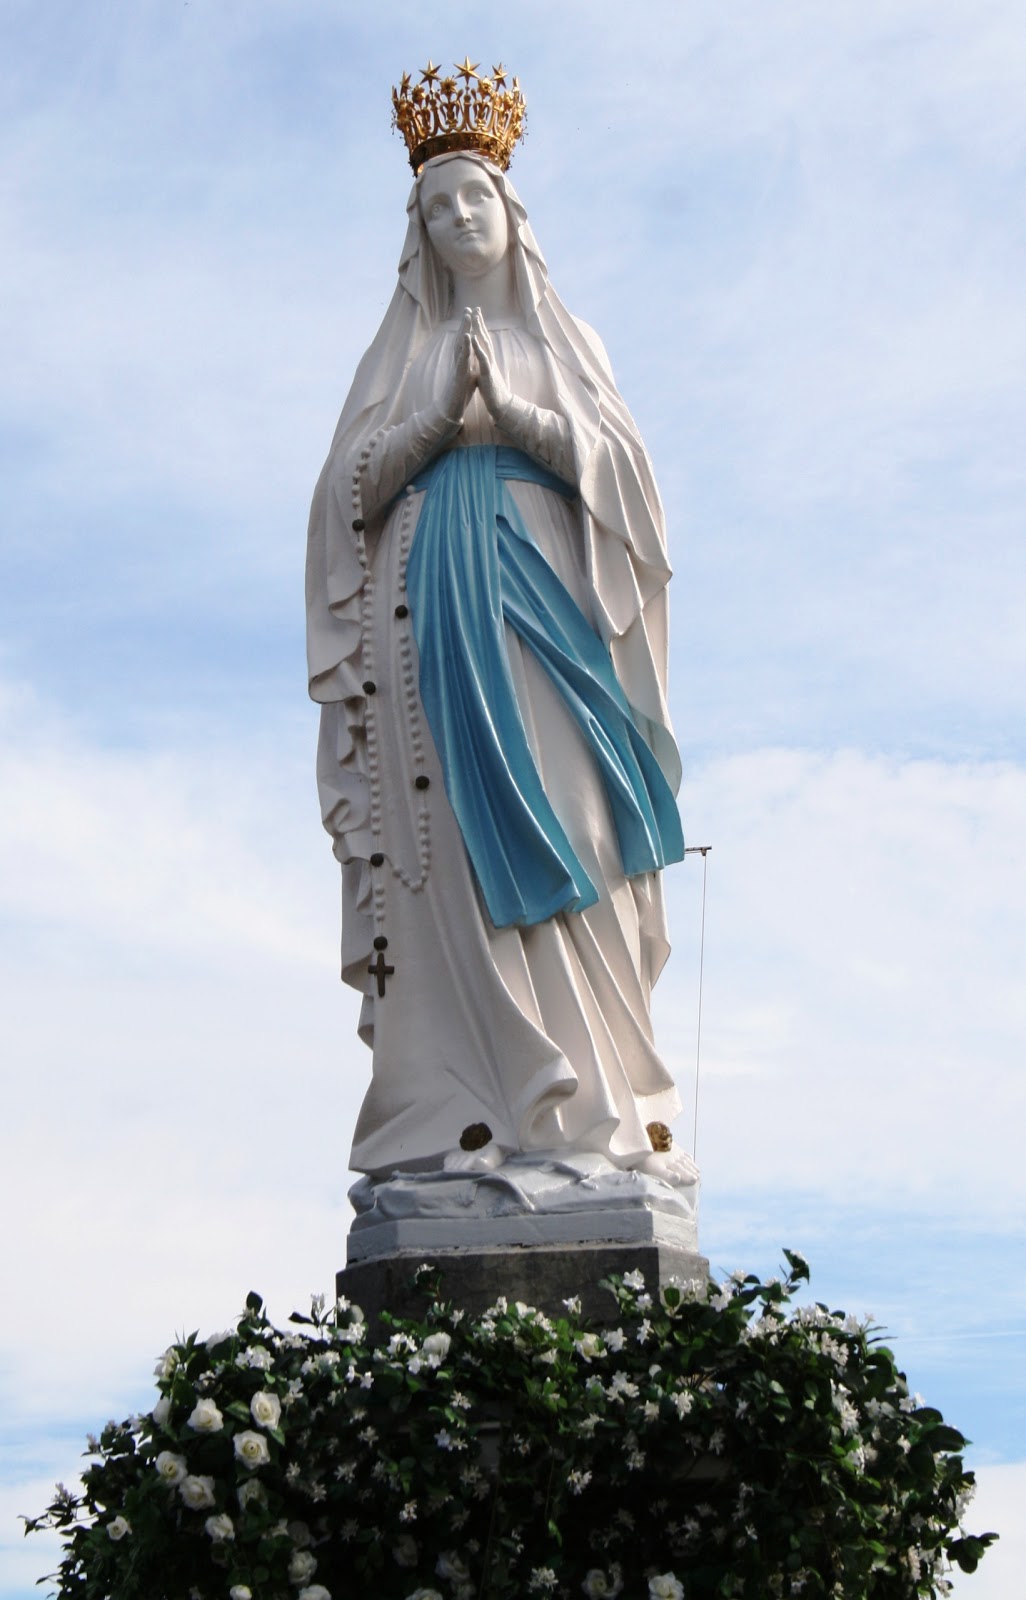 Caritas in Veritate: Our Lady of Lourdes - Day of Prayer for the Sick